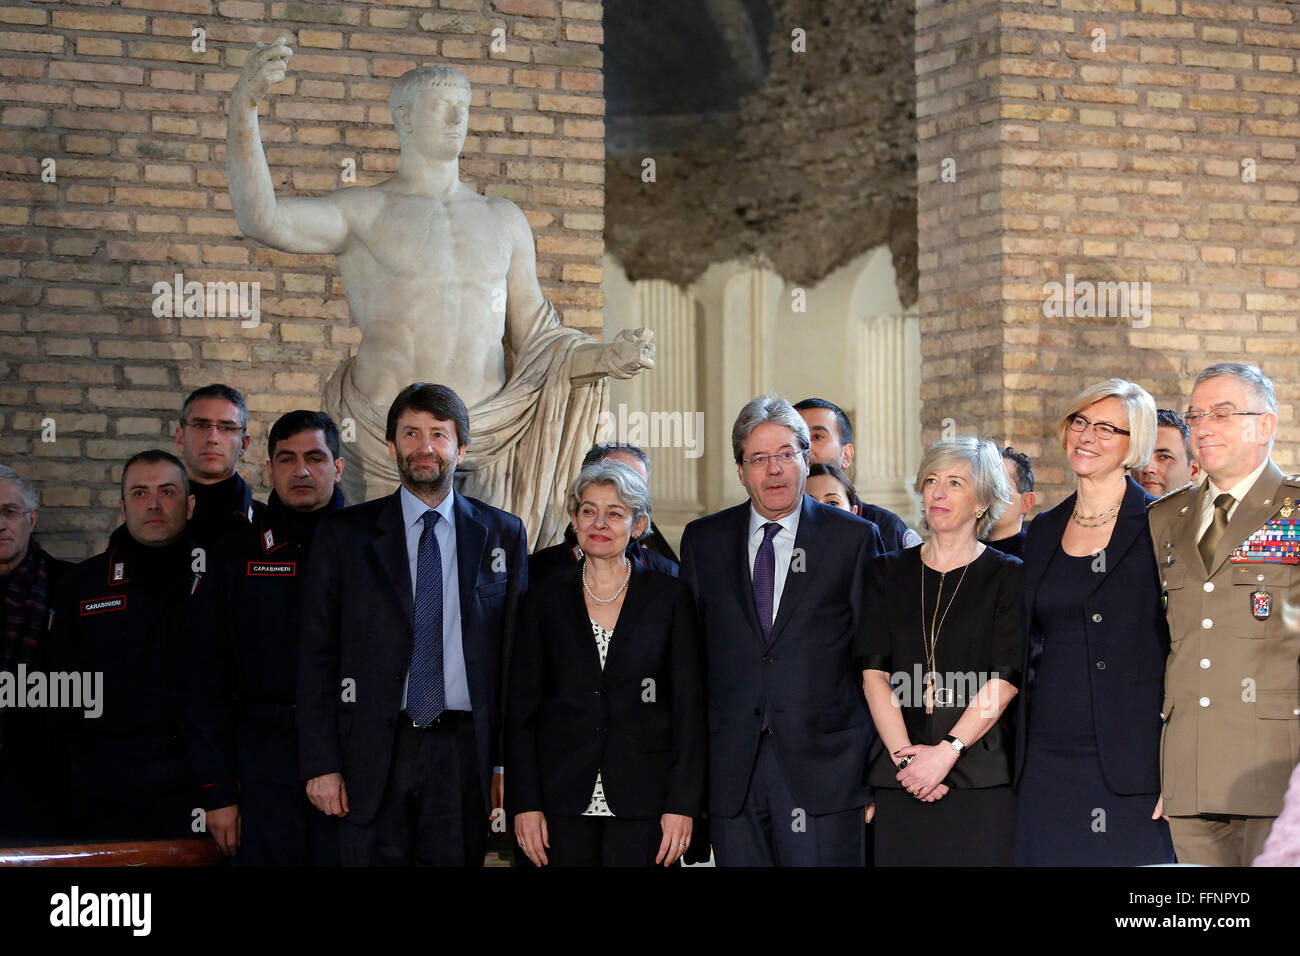 Rome, Italy. 16th February, 2016. Photo Family Rome 16th February 2016. Baths of Diocleziano. Cerimony for the birth of the Italian Task Force, Unite for Heritage, in defense of the cultural heritage.  Credit:  Insidefoto/Alamy Live News Stock Photo